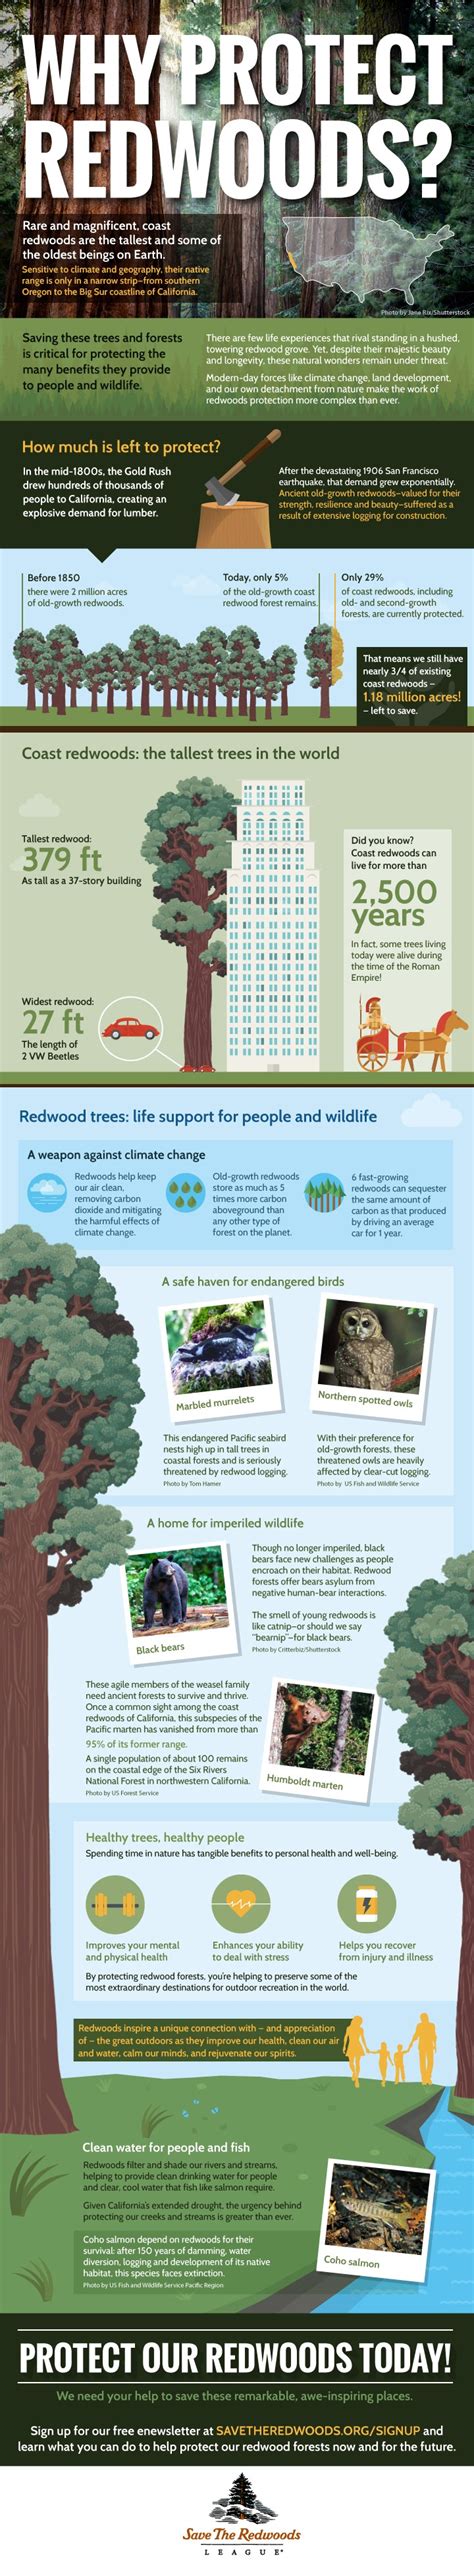 Infographic On Why Protect Redwoods By Save The Redwoods League